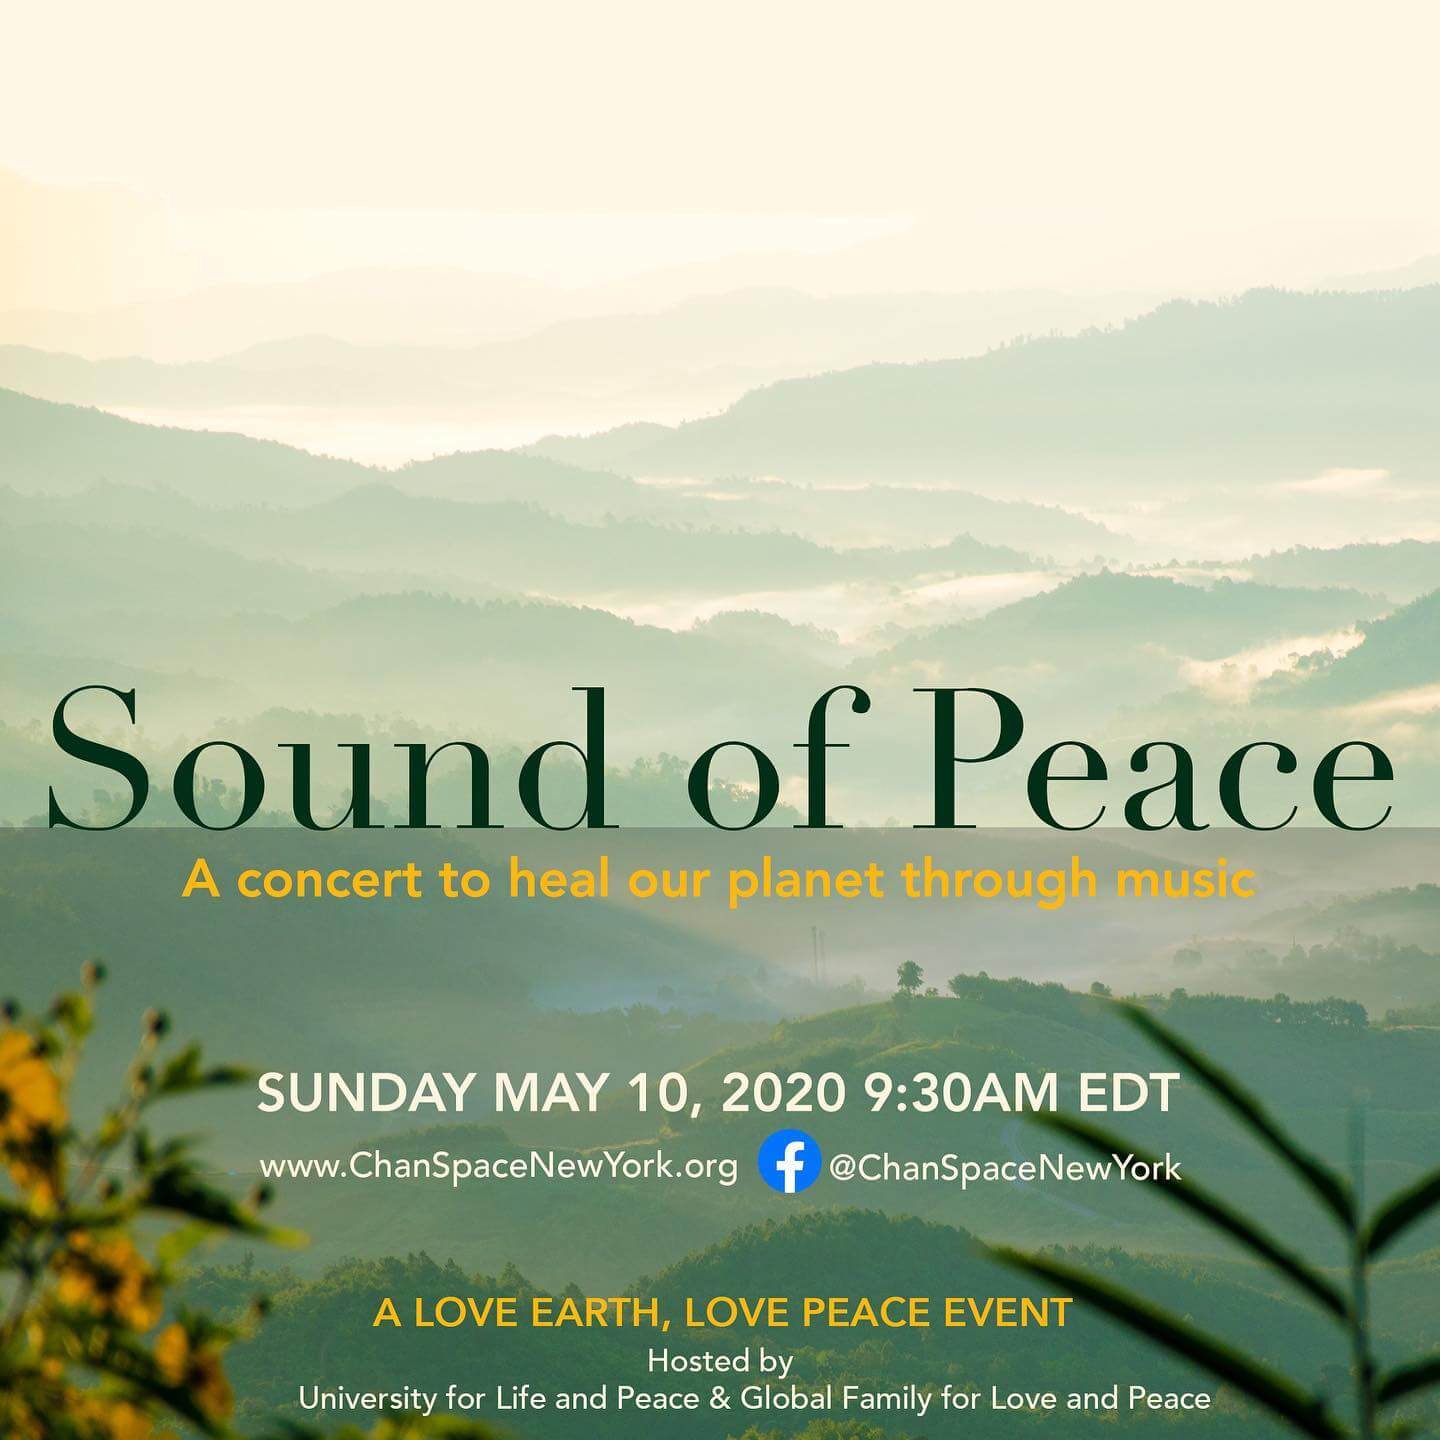  Sound of Peace Concerto in appreciating mother Earth was held. 